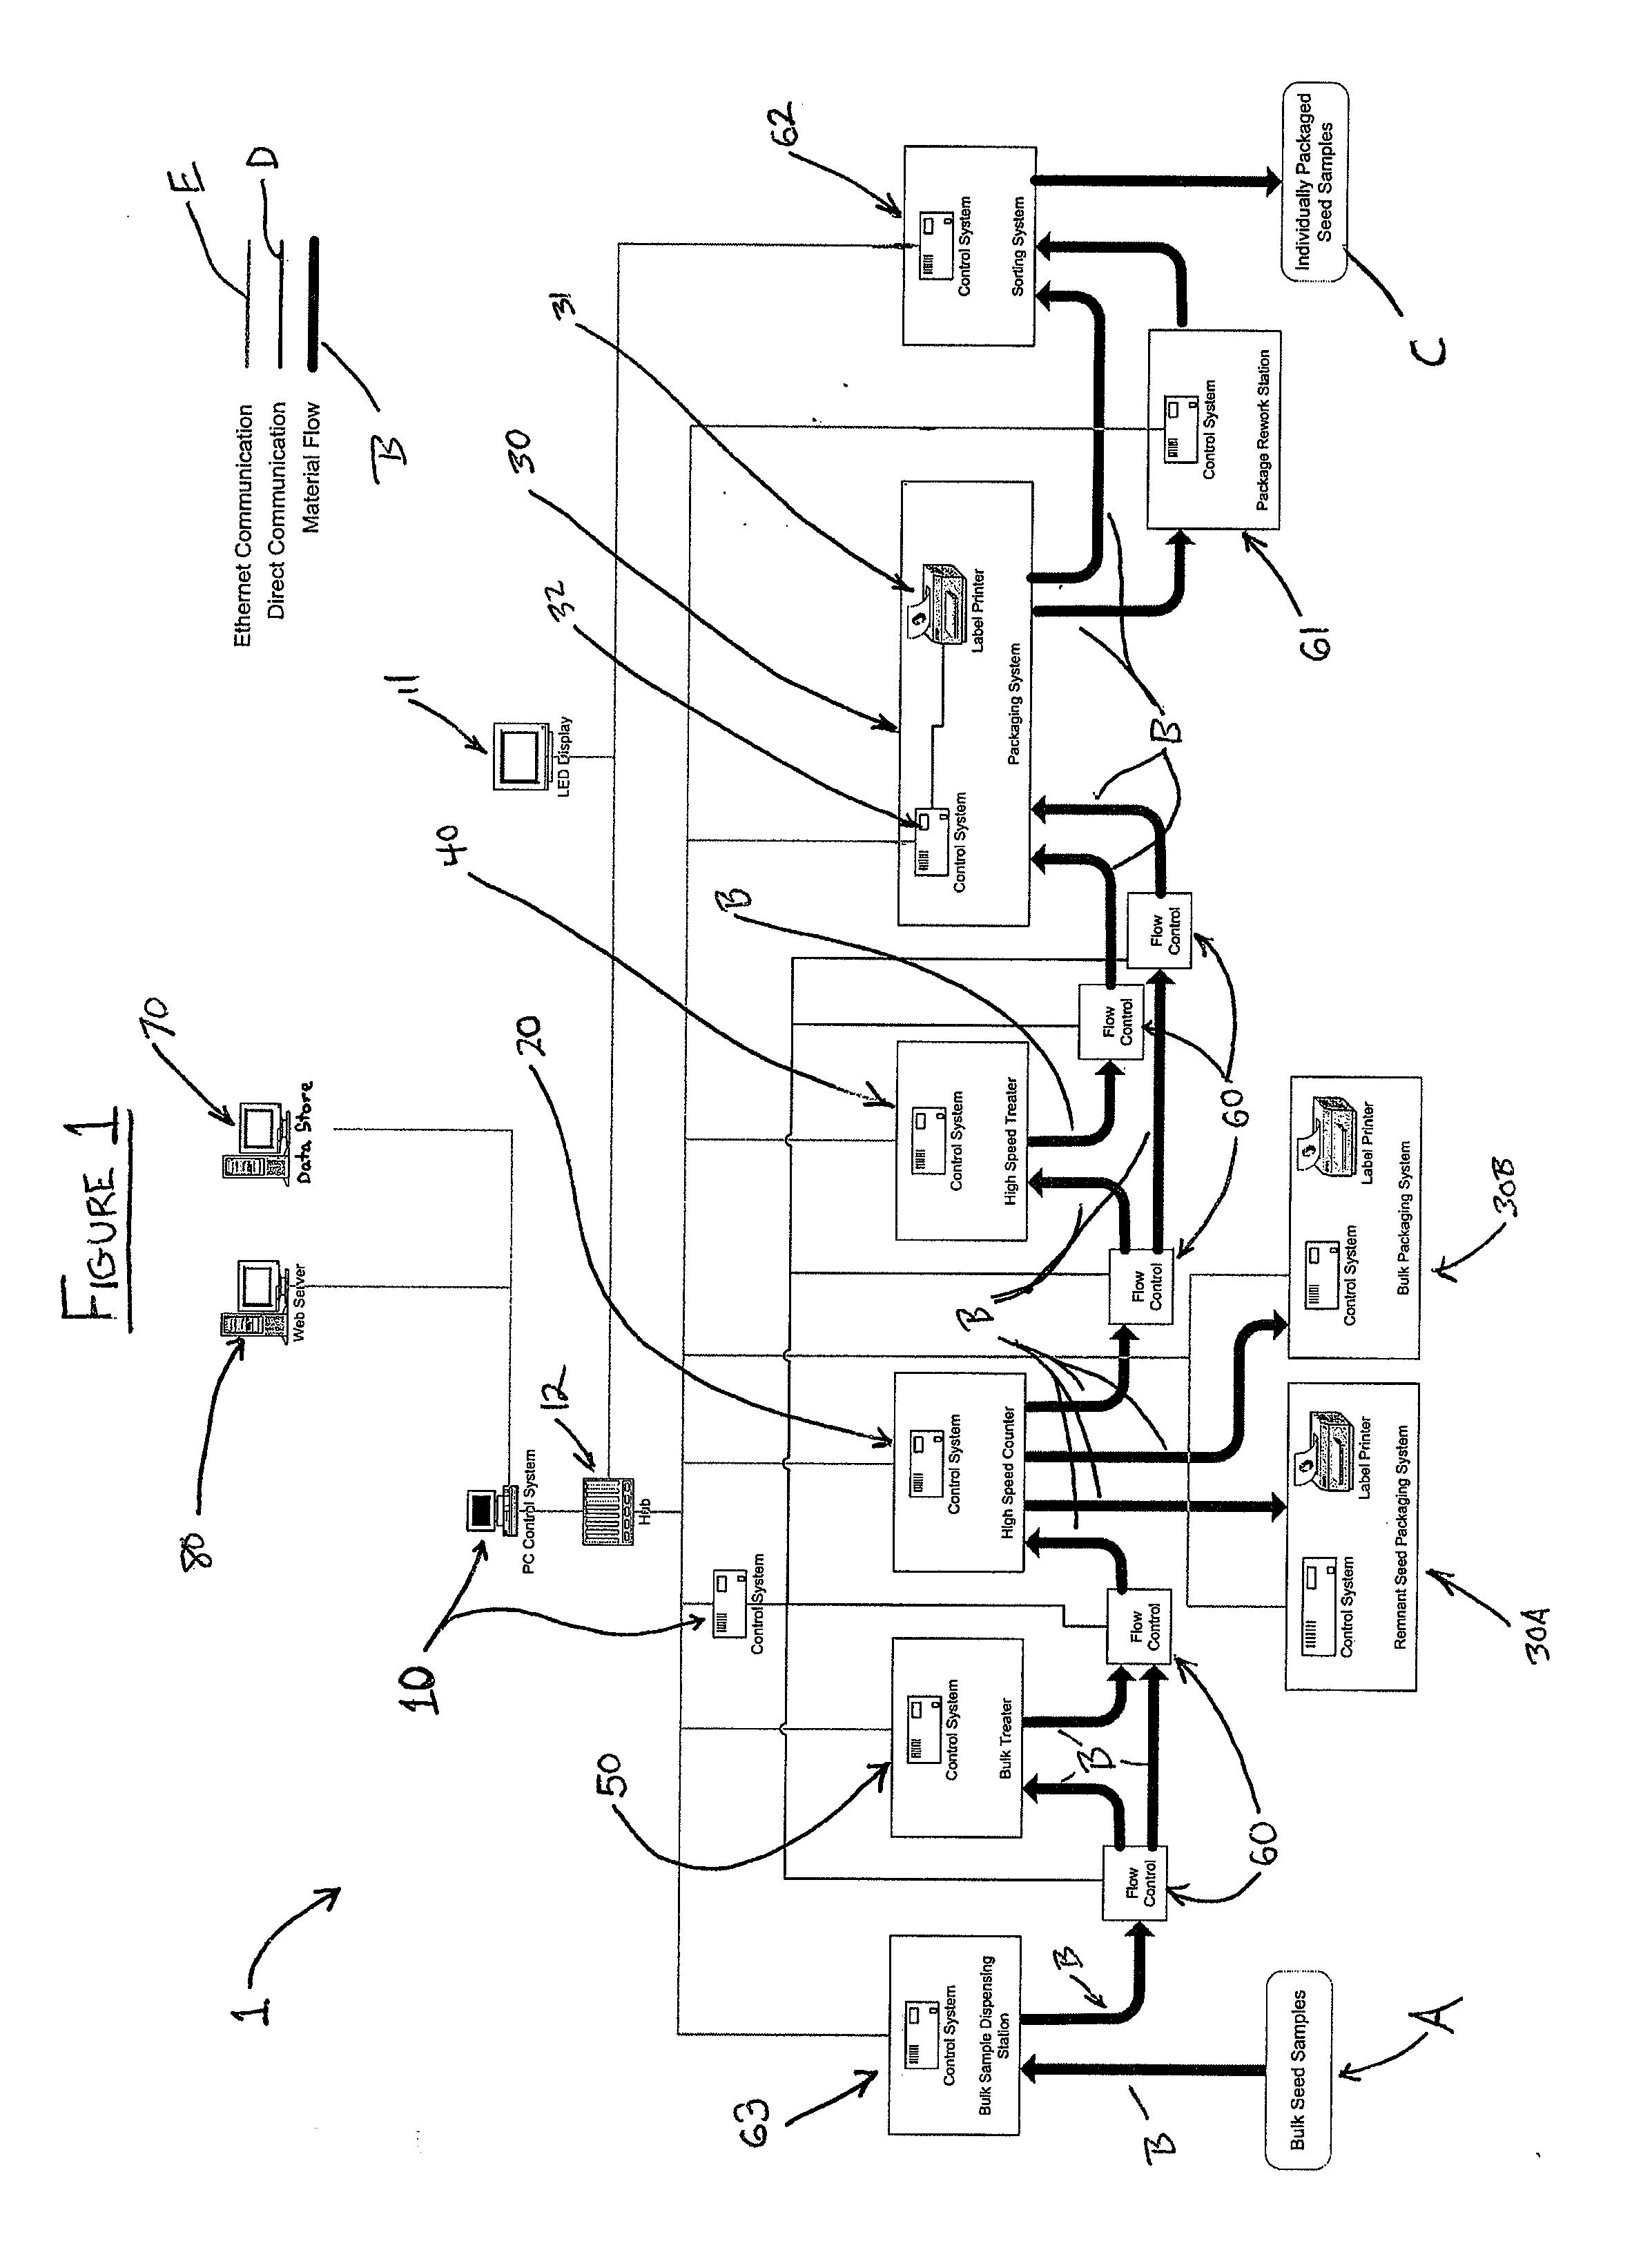 System, method, and computer program product for automated high-throughput seed sample aliquot preparation, treatment and dispersal